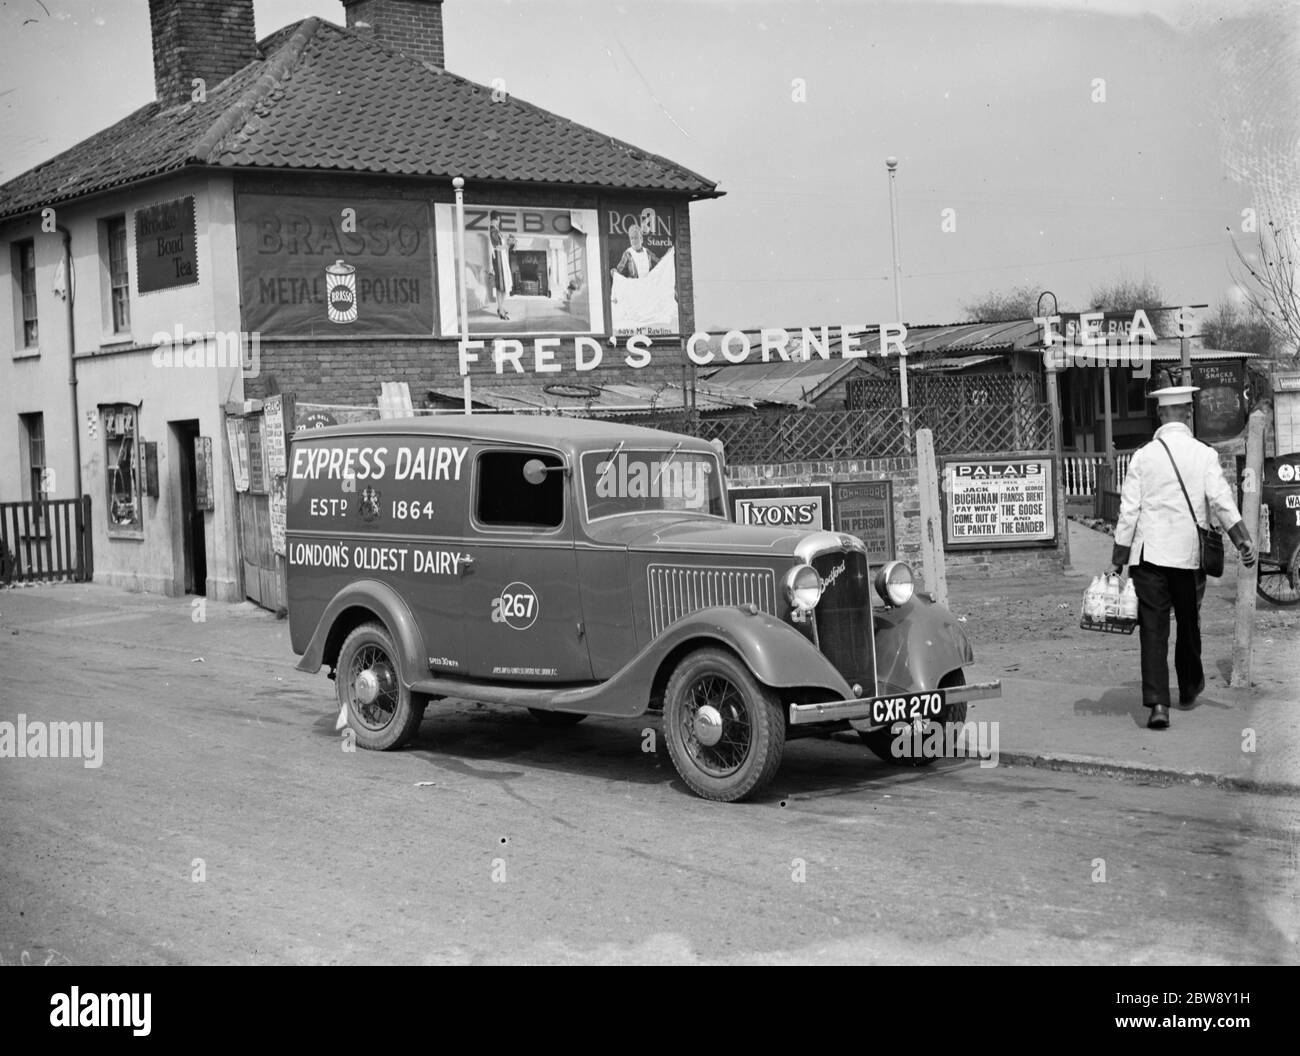 A Express Dairy Delivery Bedford van from London , makes a delivery to Fred 's Corner . 1936 Stock Photo